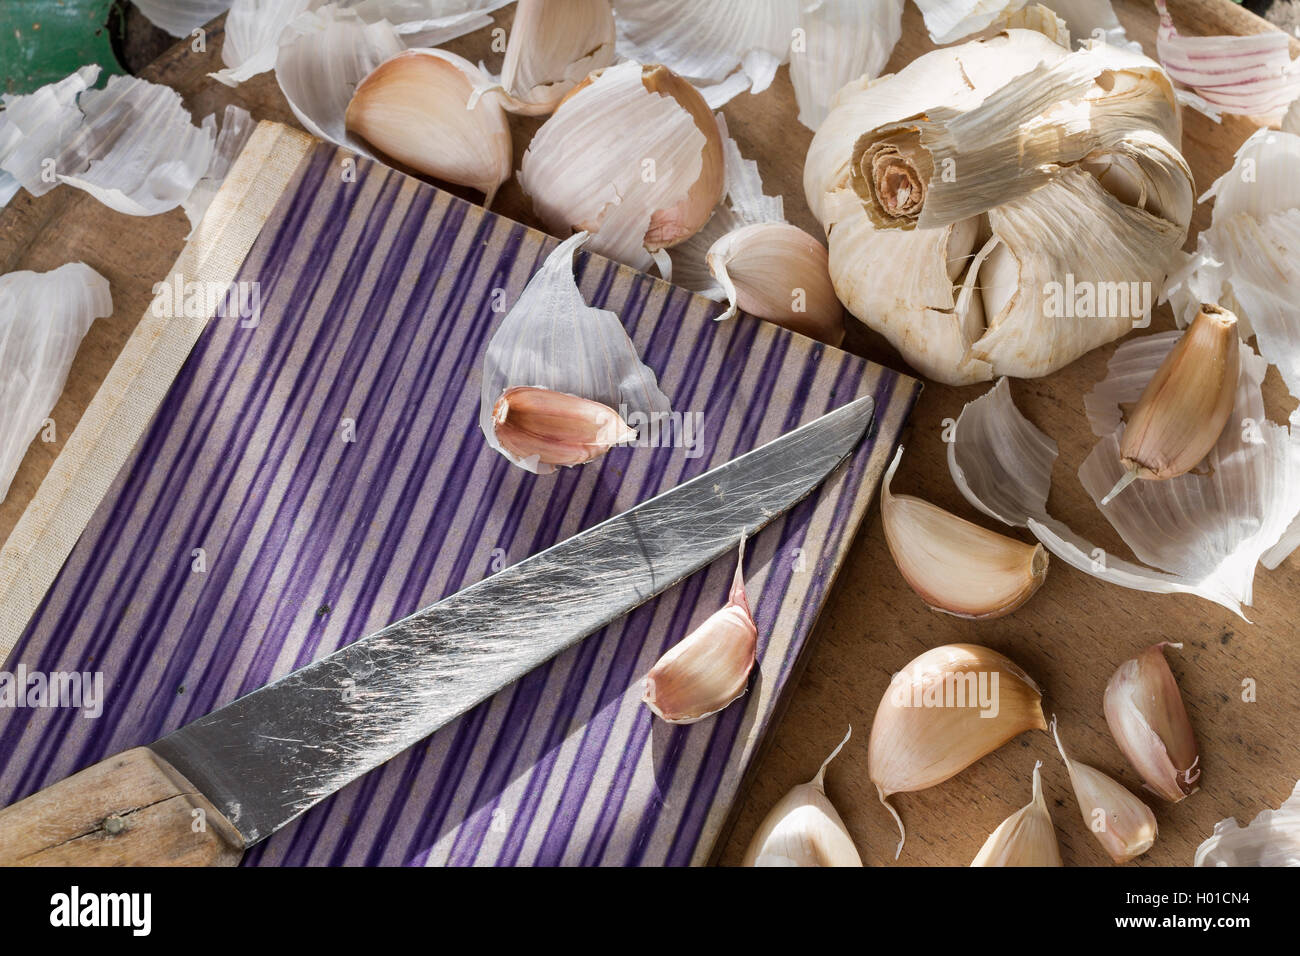 Organic garlic arranged with an old vintage cooking book and knife as a natural still life for healthy and vegetarian food Stock Photo